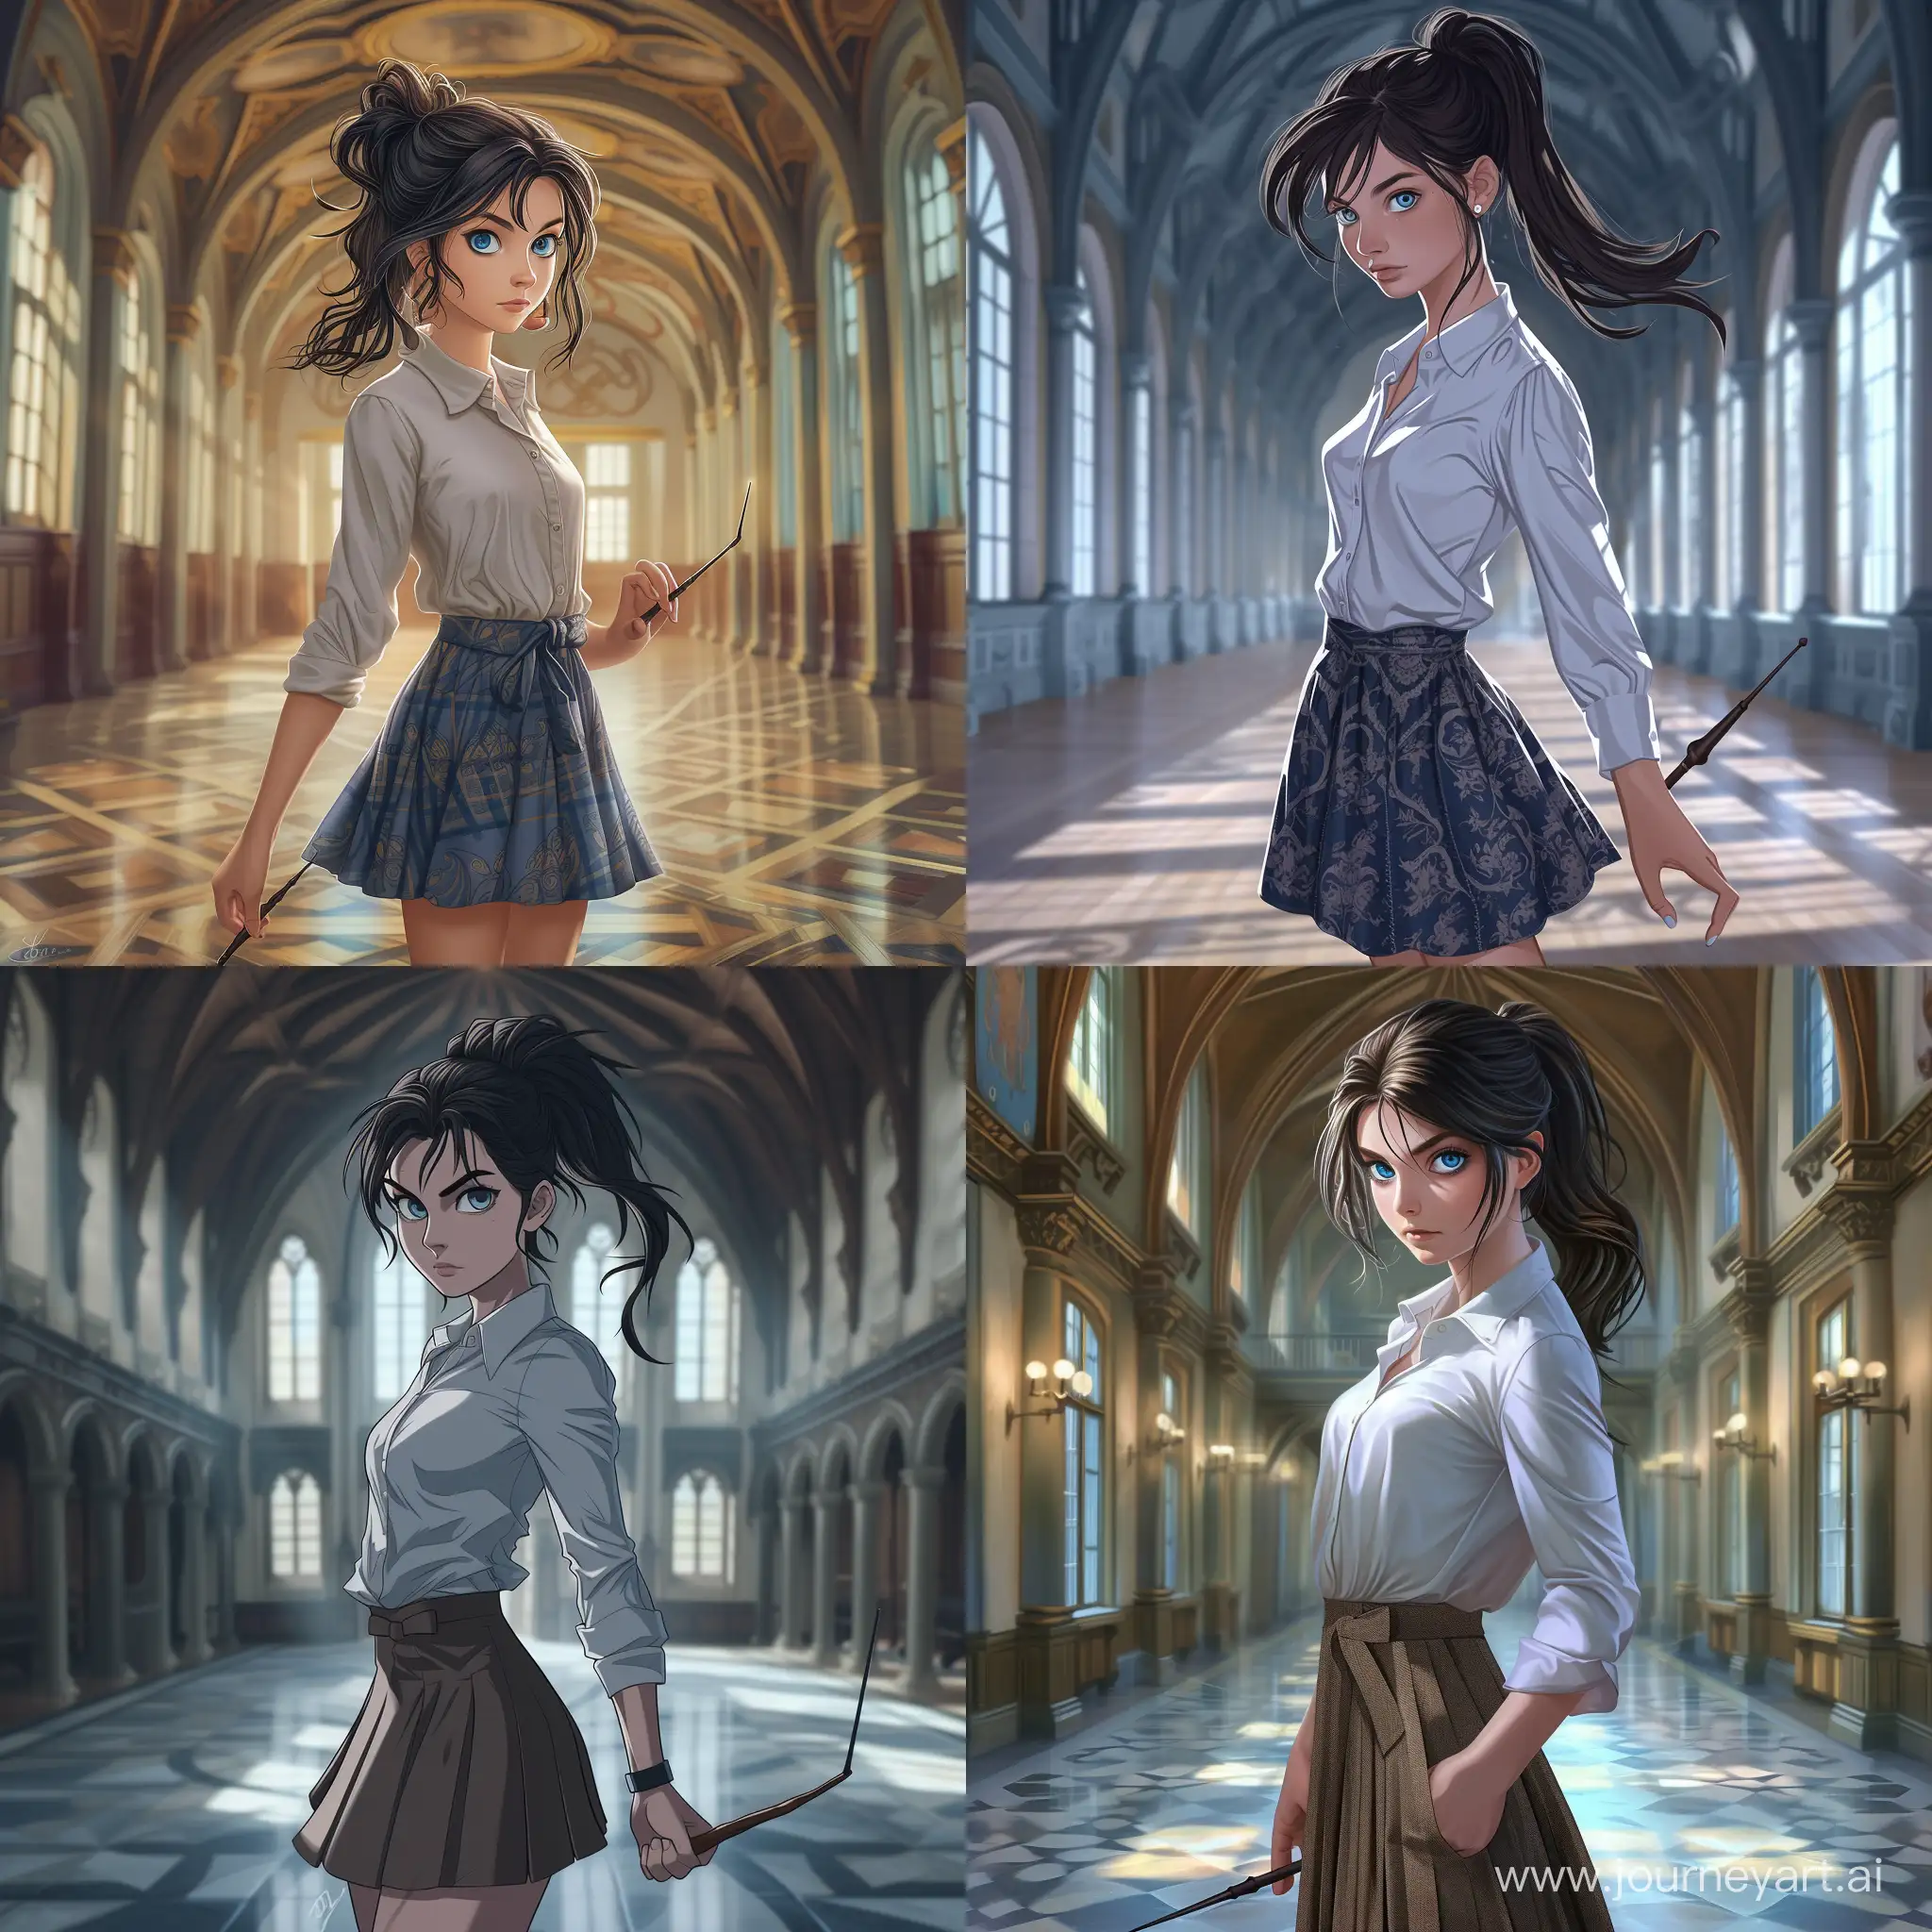 Beautiful girl, disheveled dark hair tied in a ponytail, blue eyes, white skin, teenager, 15 years old, Hogwarts, Ravenclaw, skirt and blouse, standing in a spacious hall, magic wand, magic duel, spell, full height, high quality, high detail, cartoon art